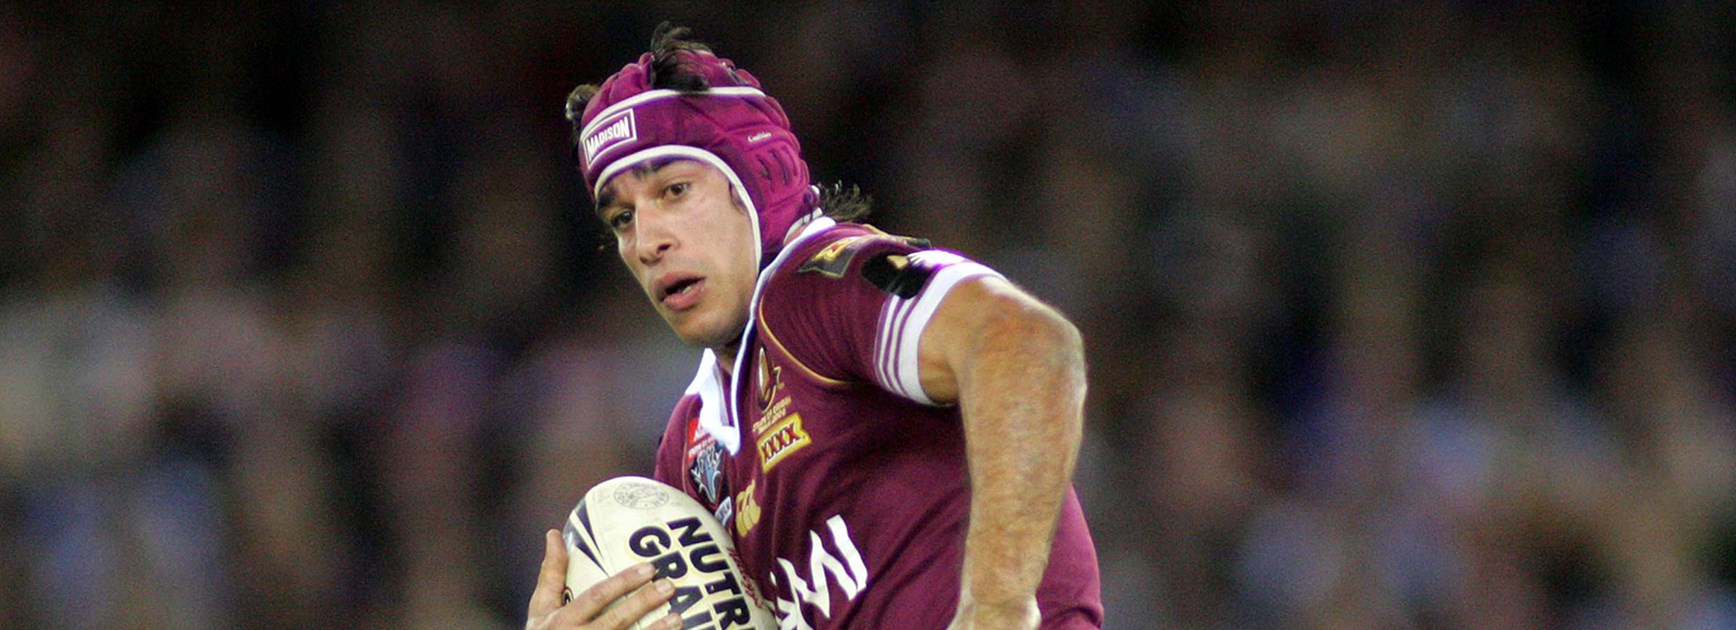 Johnathan Thurston in action for Queensland in the 2006 State of Origin series.